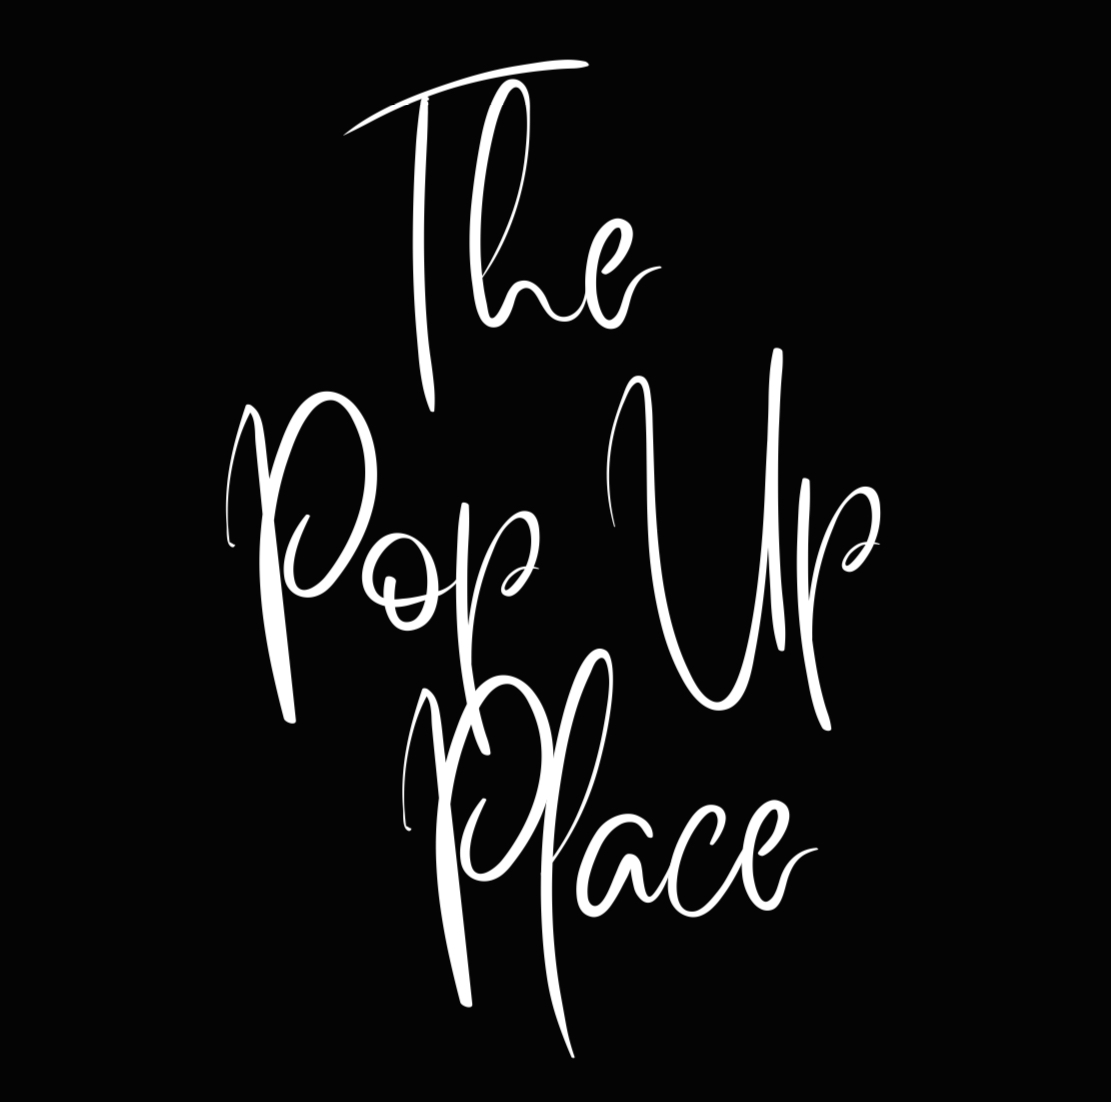 The Pop Up Place logo